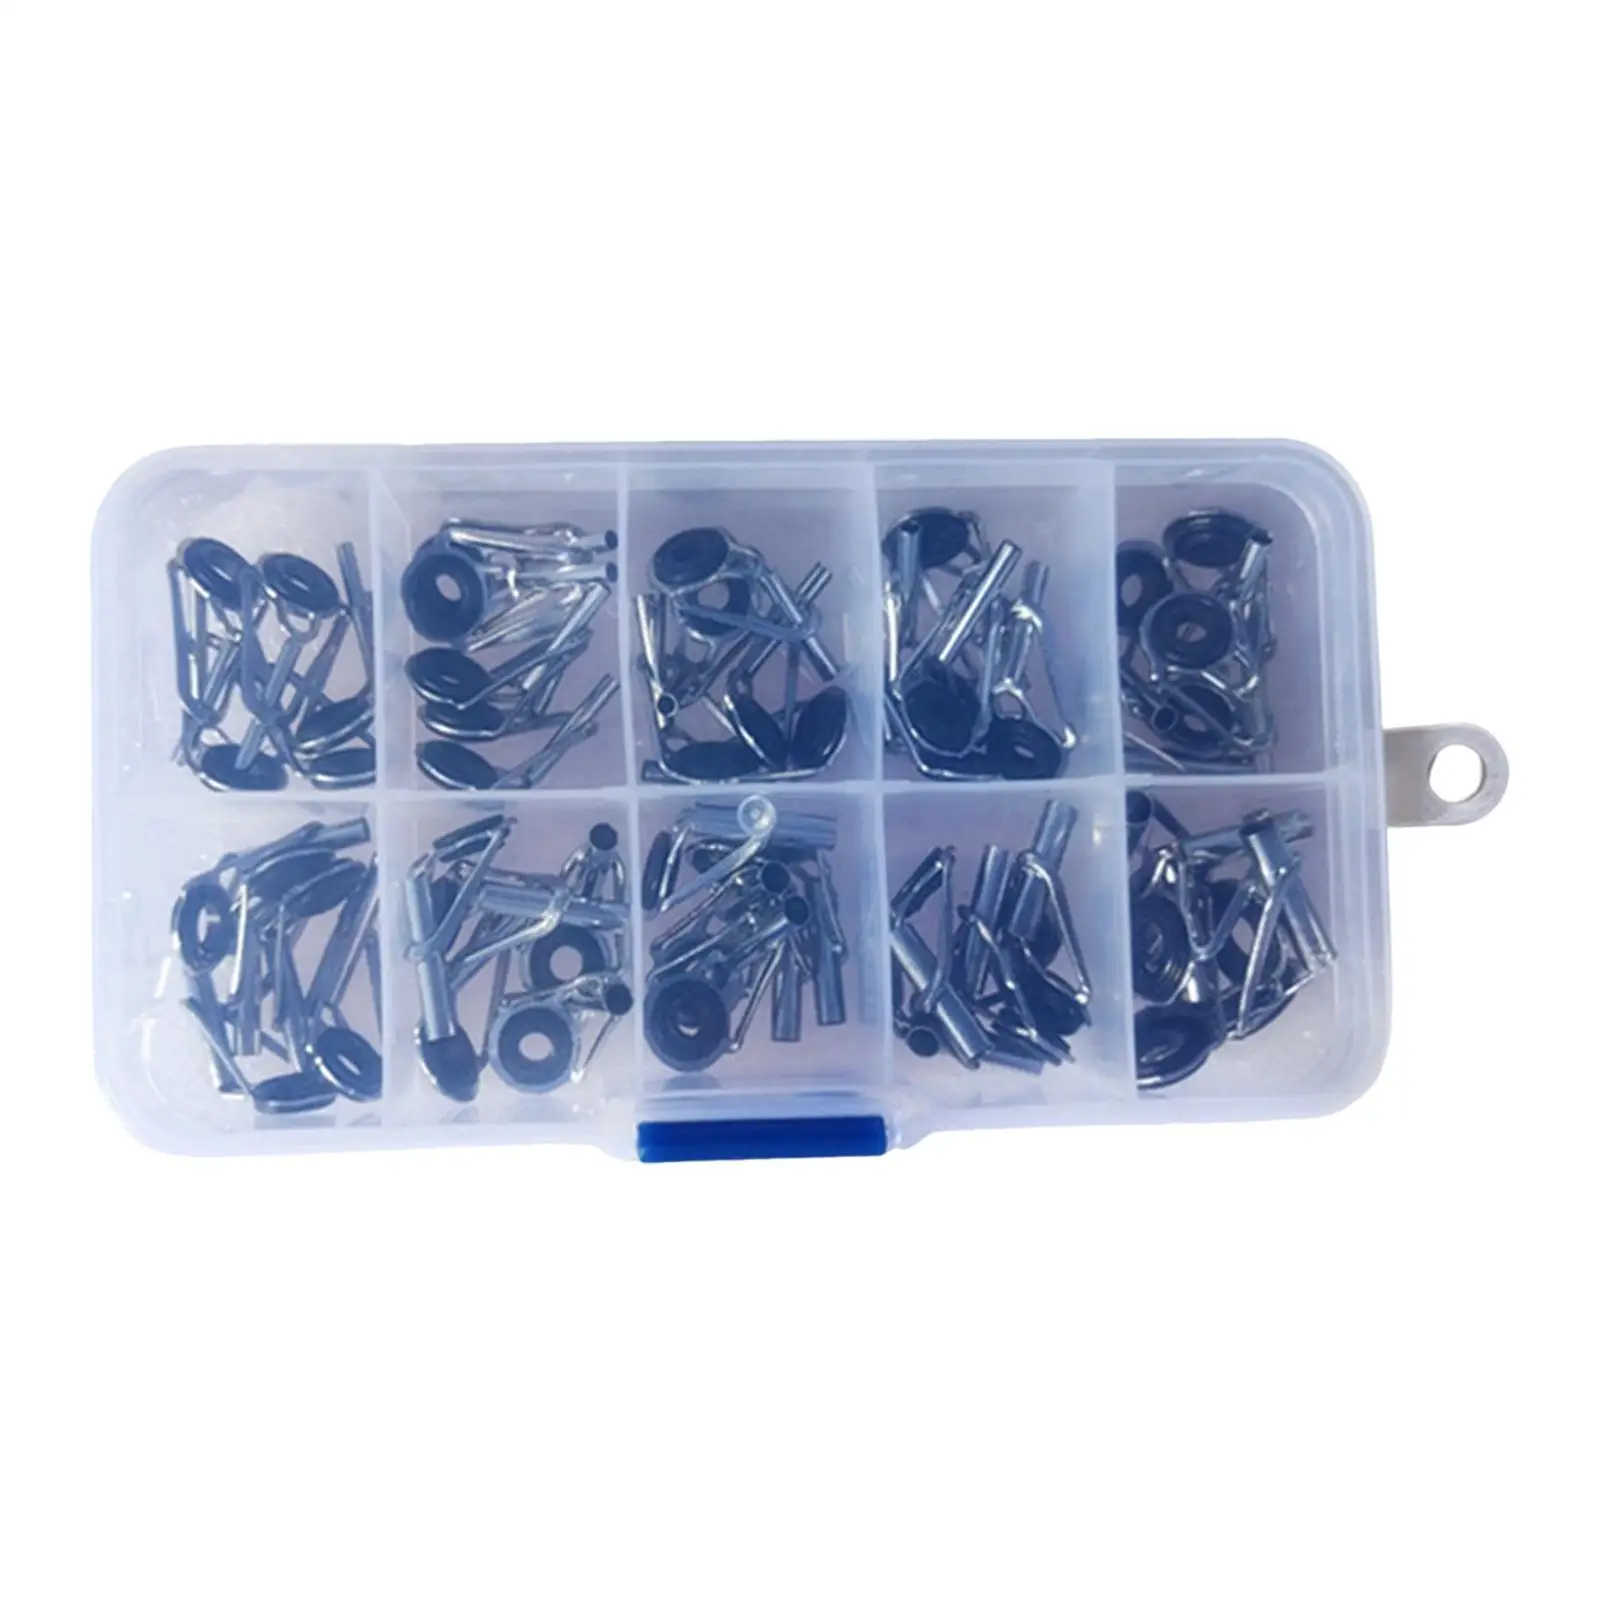 50Pcs Fishing Rod Guides Ring Set Mixed Size in A Box Lightweight Guides Replacement Sturdy Guides Line Rings for Rod Rebuilding